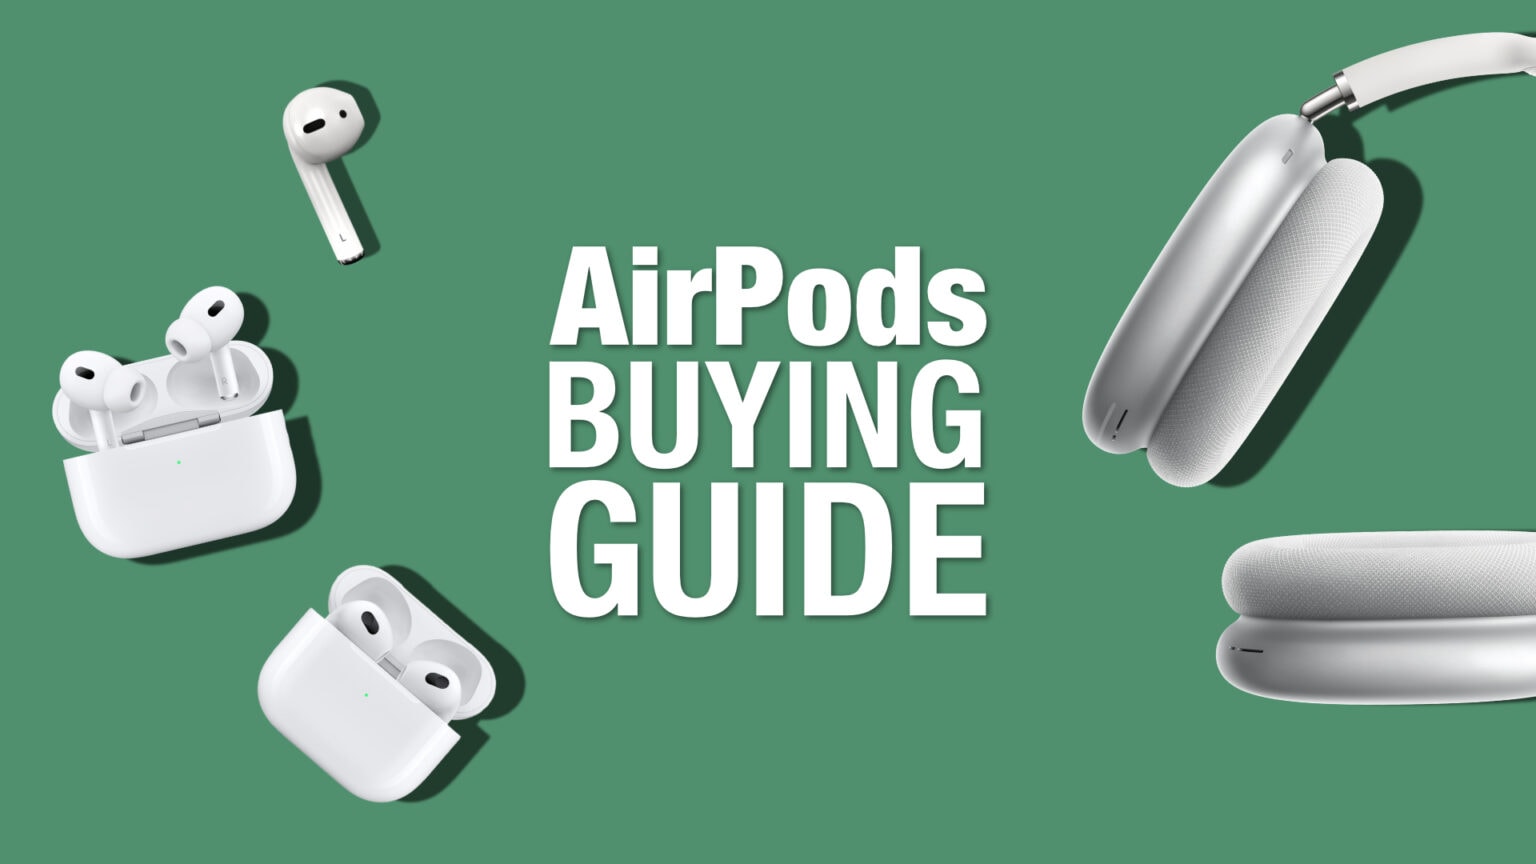 AirPods Buying Guide: Choosing the best models and accessories